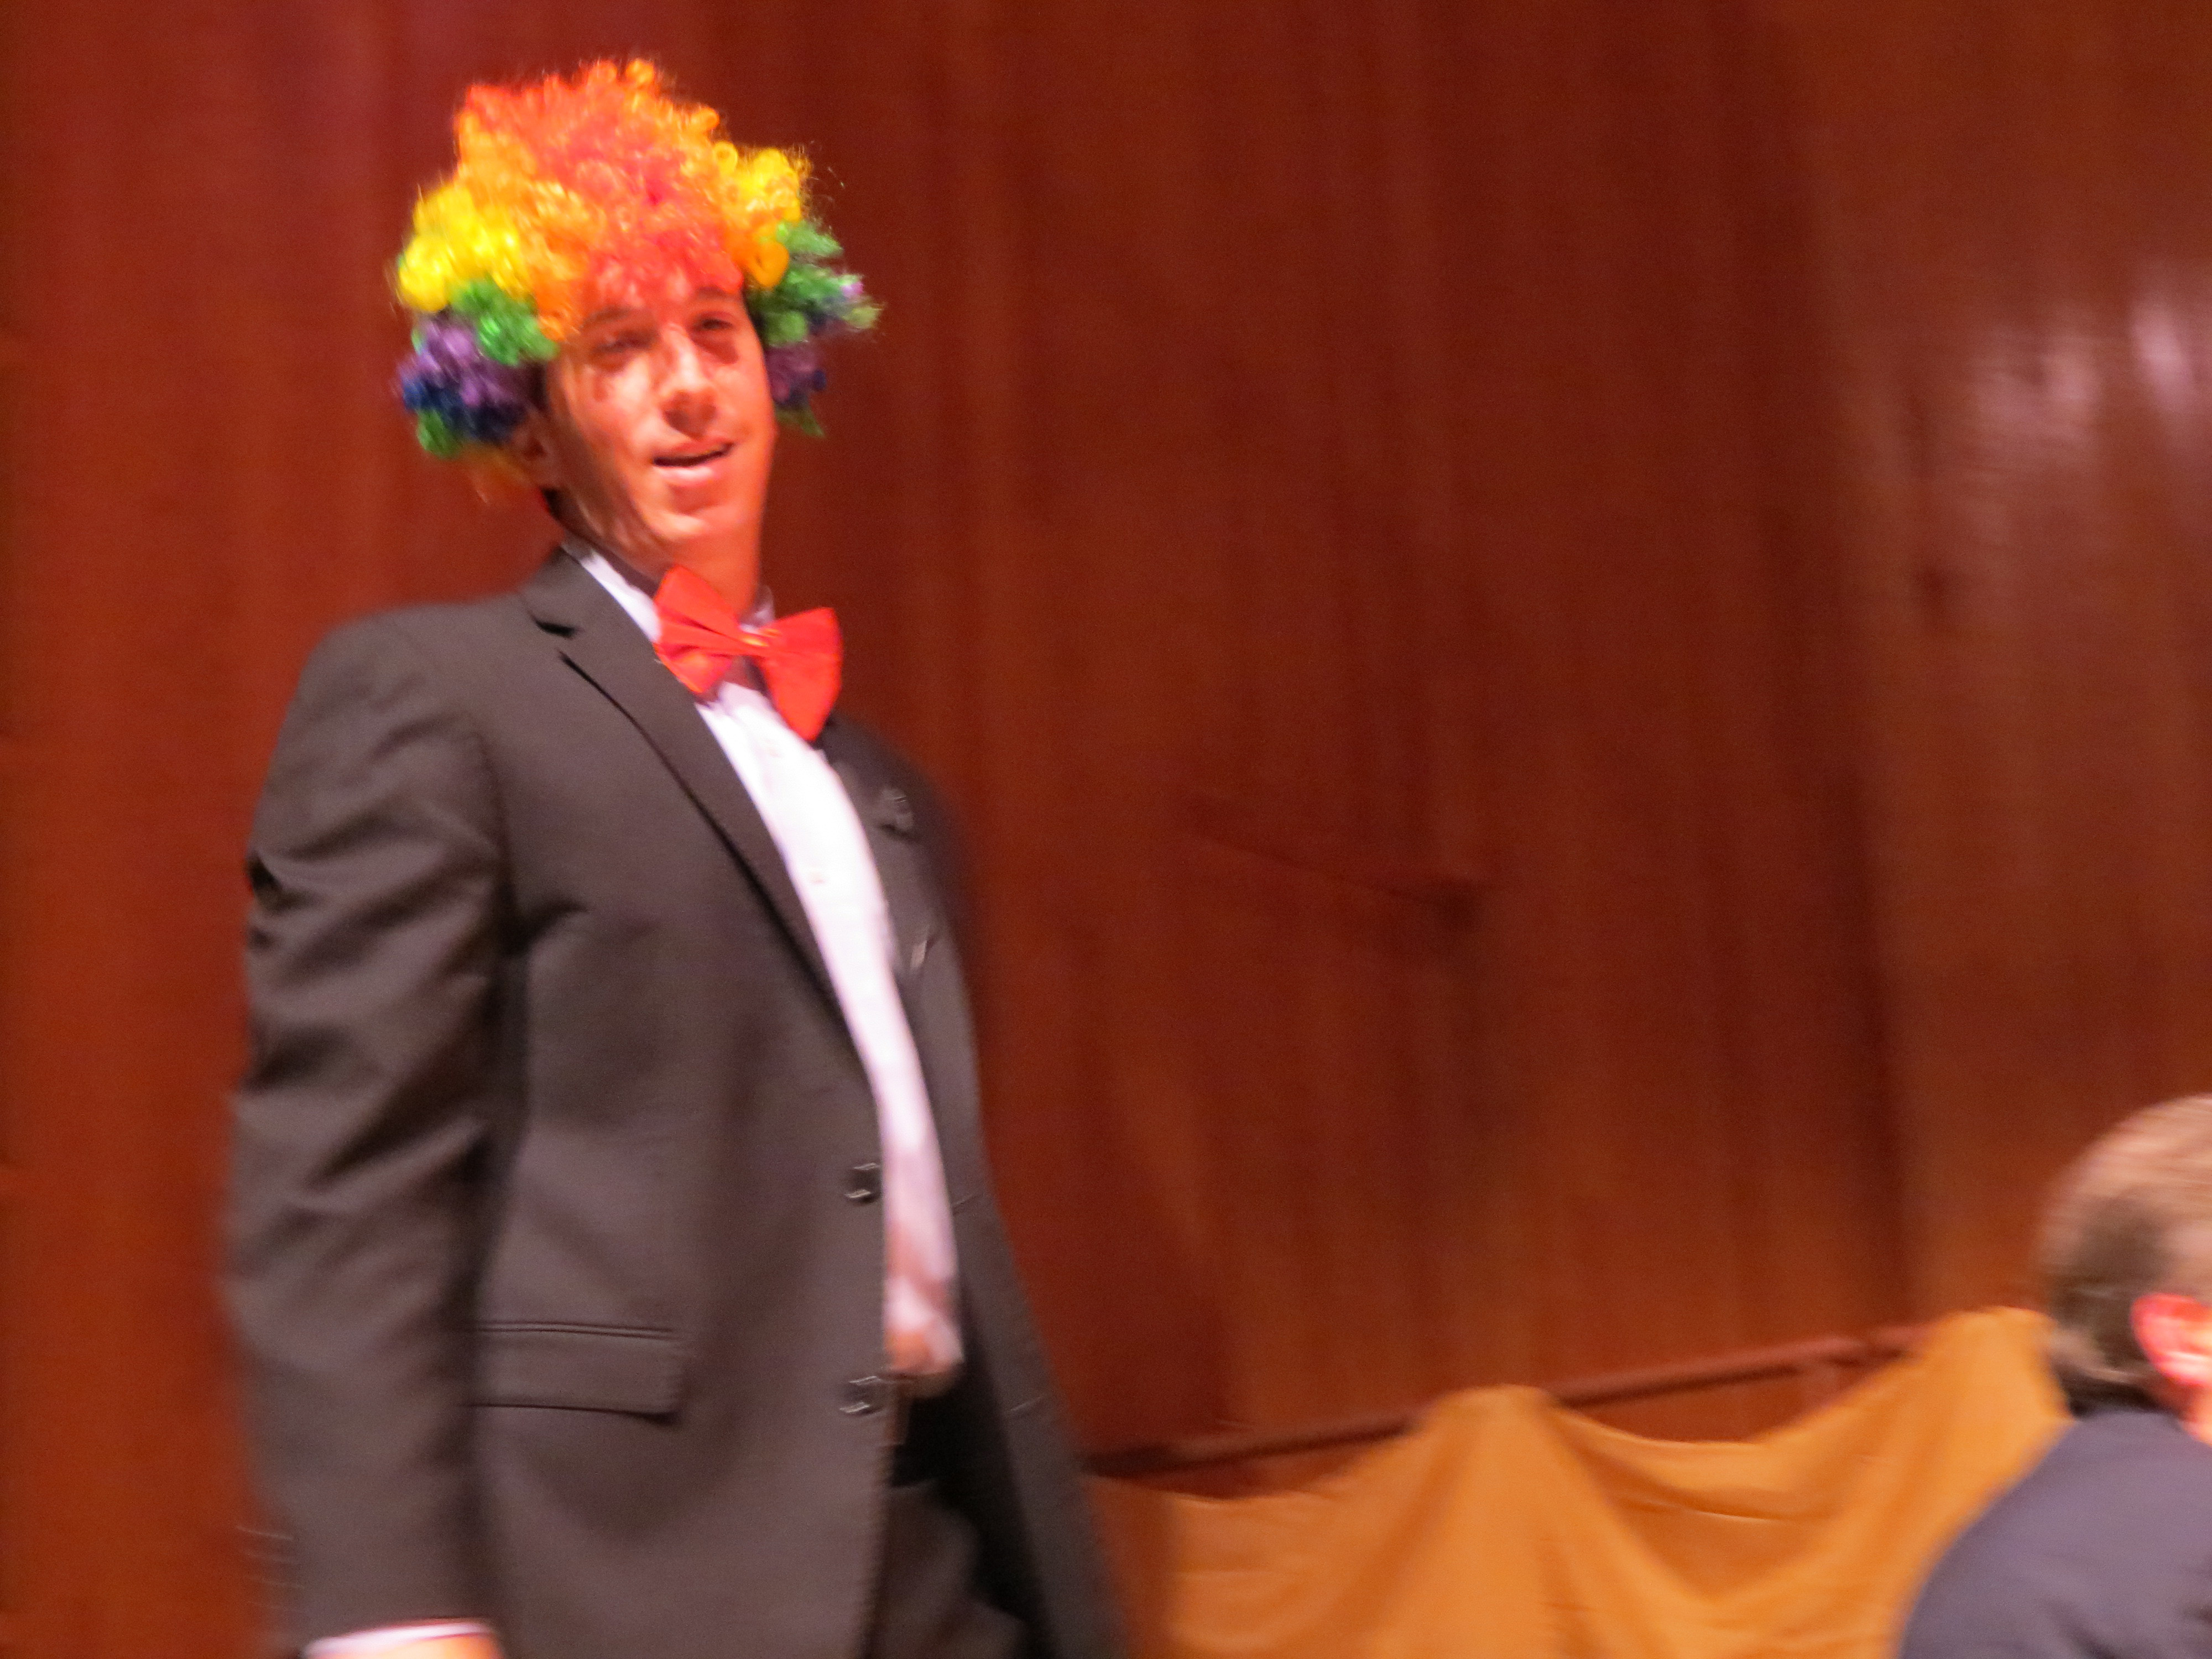 Assemblyman Phil Golder dons a rainbow Afro wig in honor of Mayor-elect Bill de Blasio's son's hairstyle that assumed a starring role in de Blasio's mayoral bid.